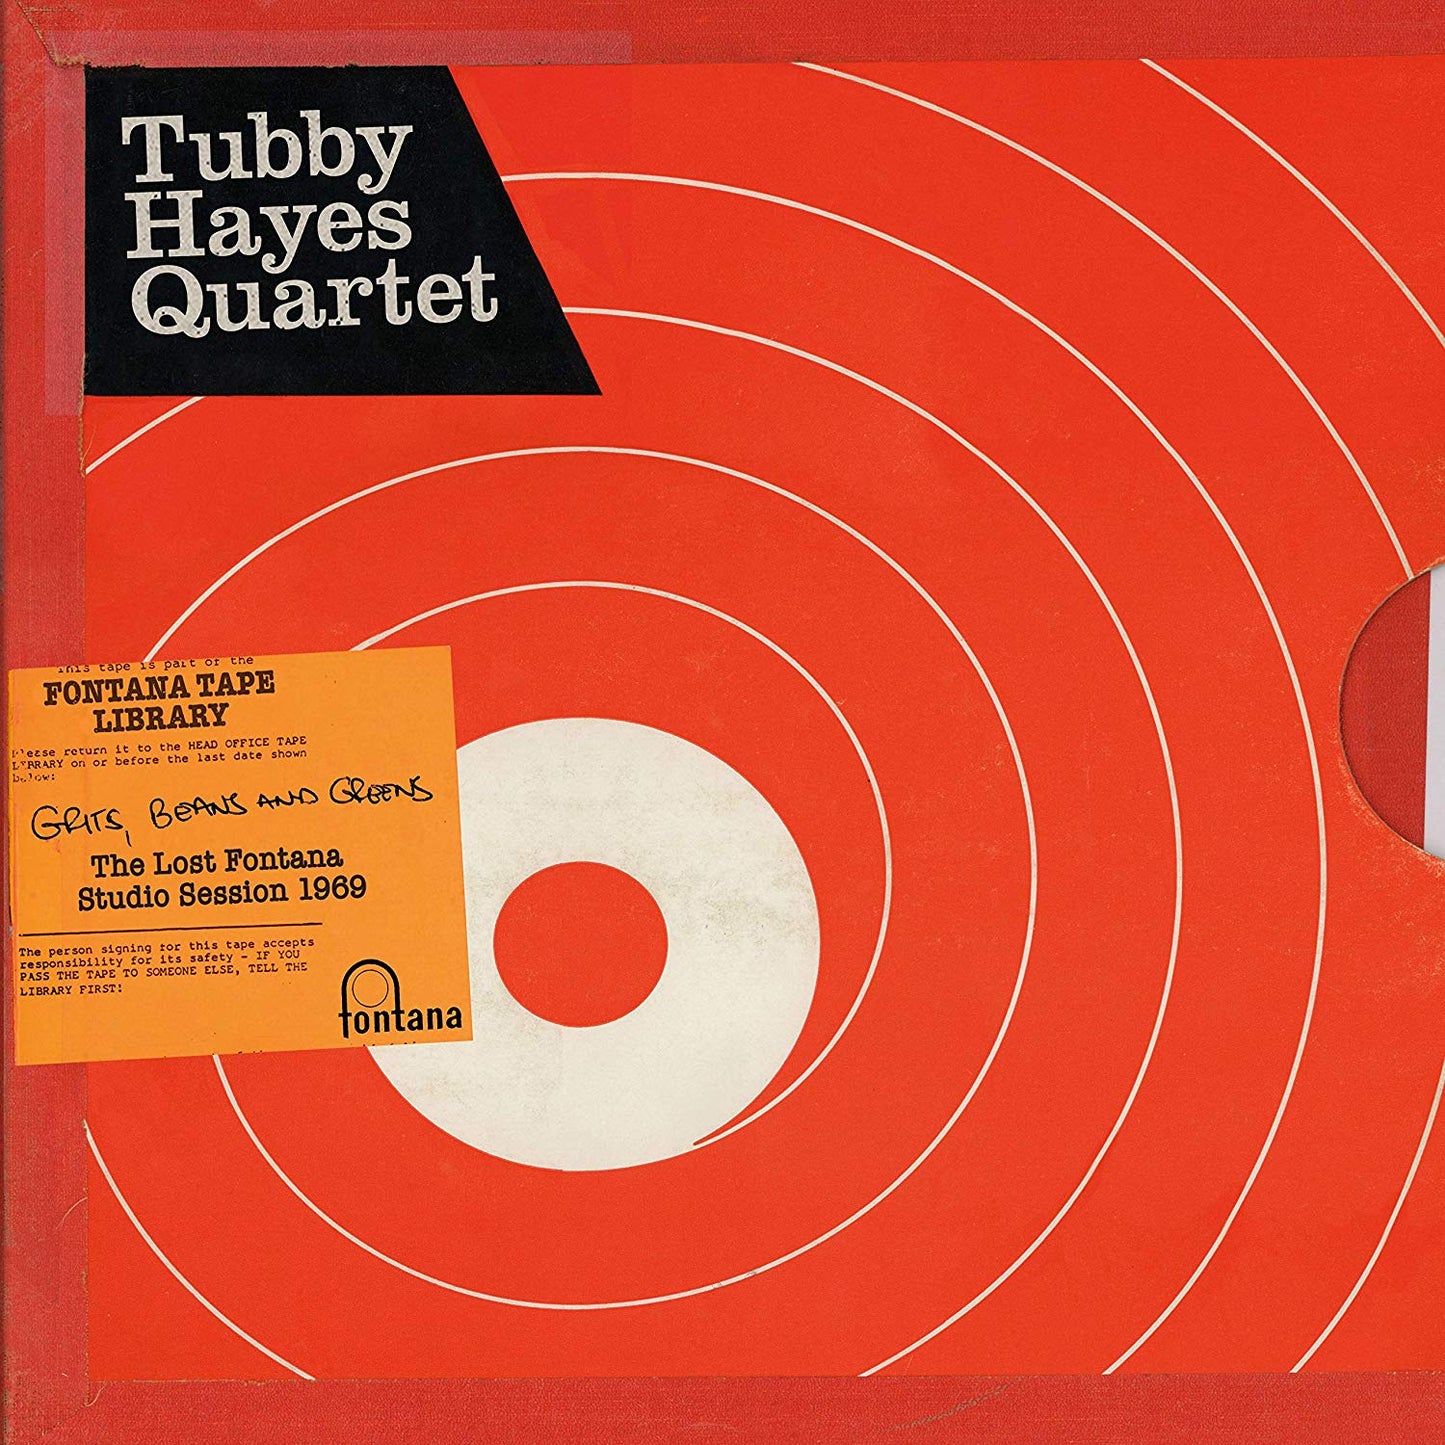 Tubby Hayes Quartet 'Grits, Beans And Greens: The Lost Fontana Studio Sessions 1969' LP